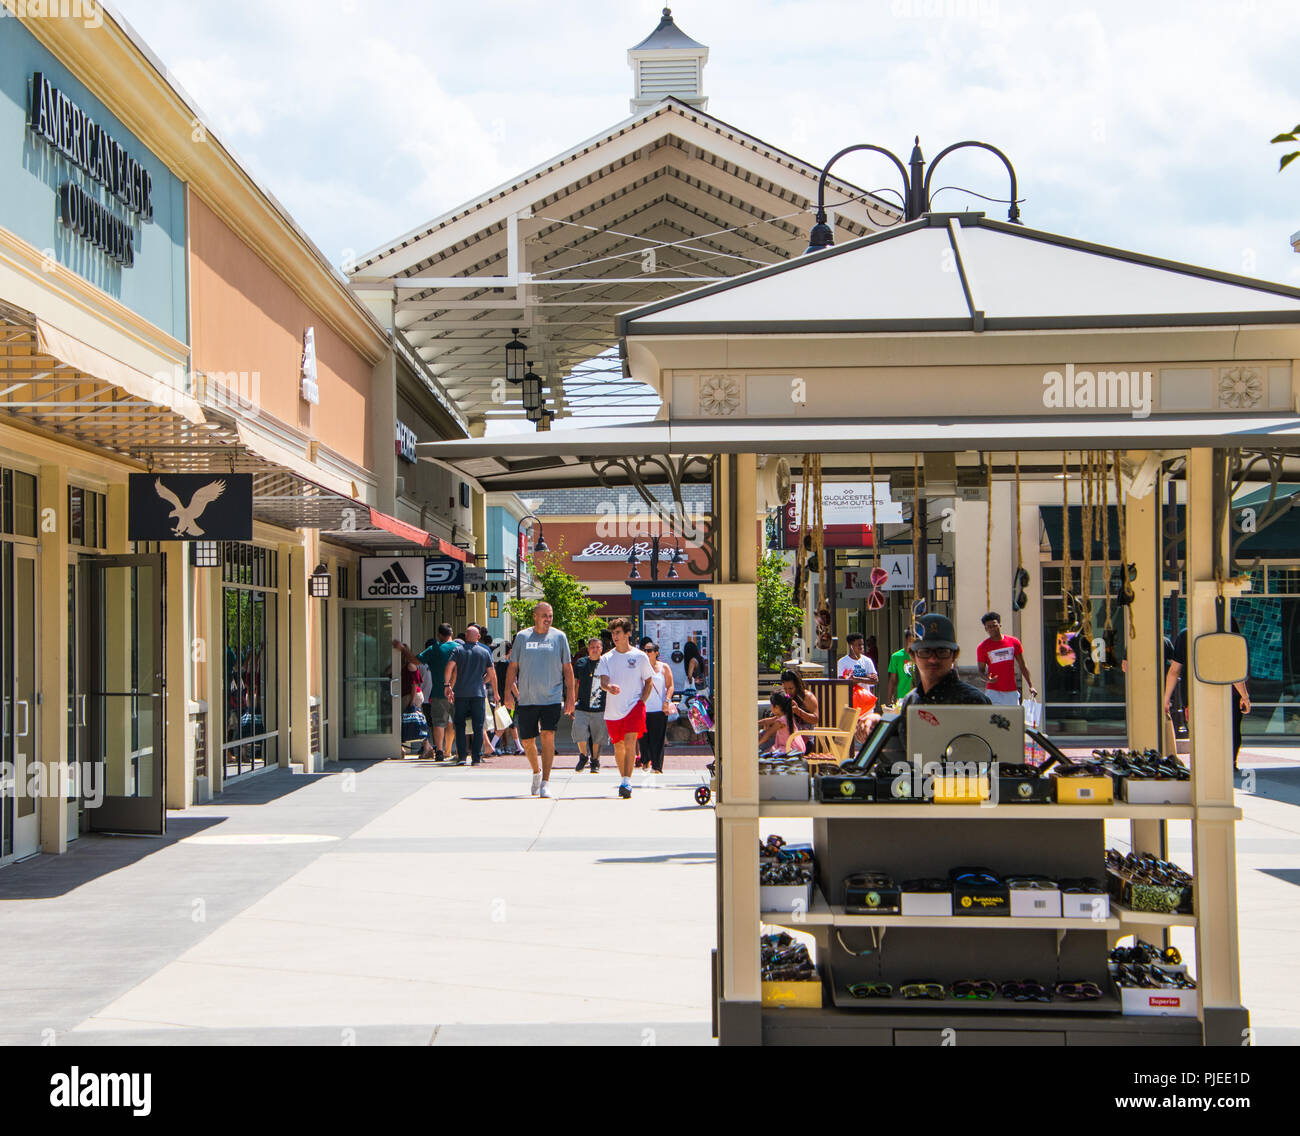 Premium Outlet Mall Stock Photos & Premium Outlet Mall Stock Images - Alamy